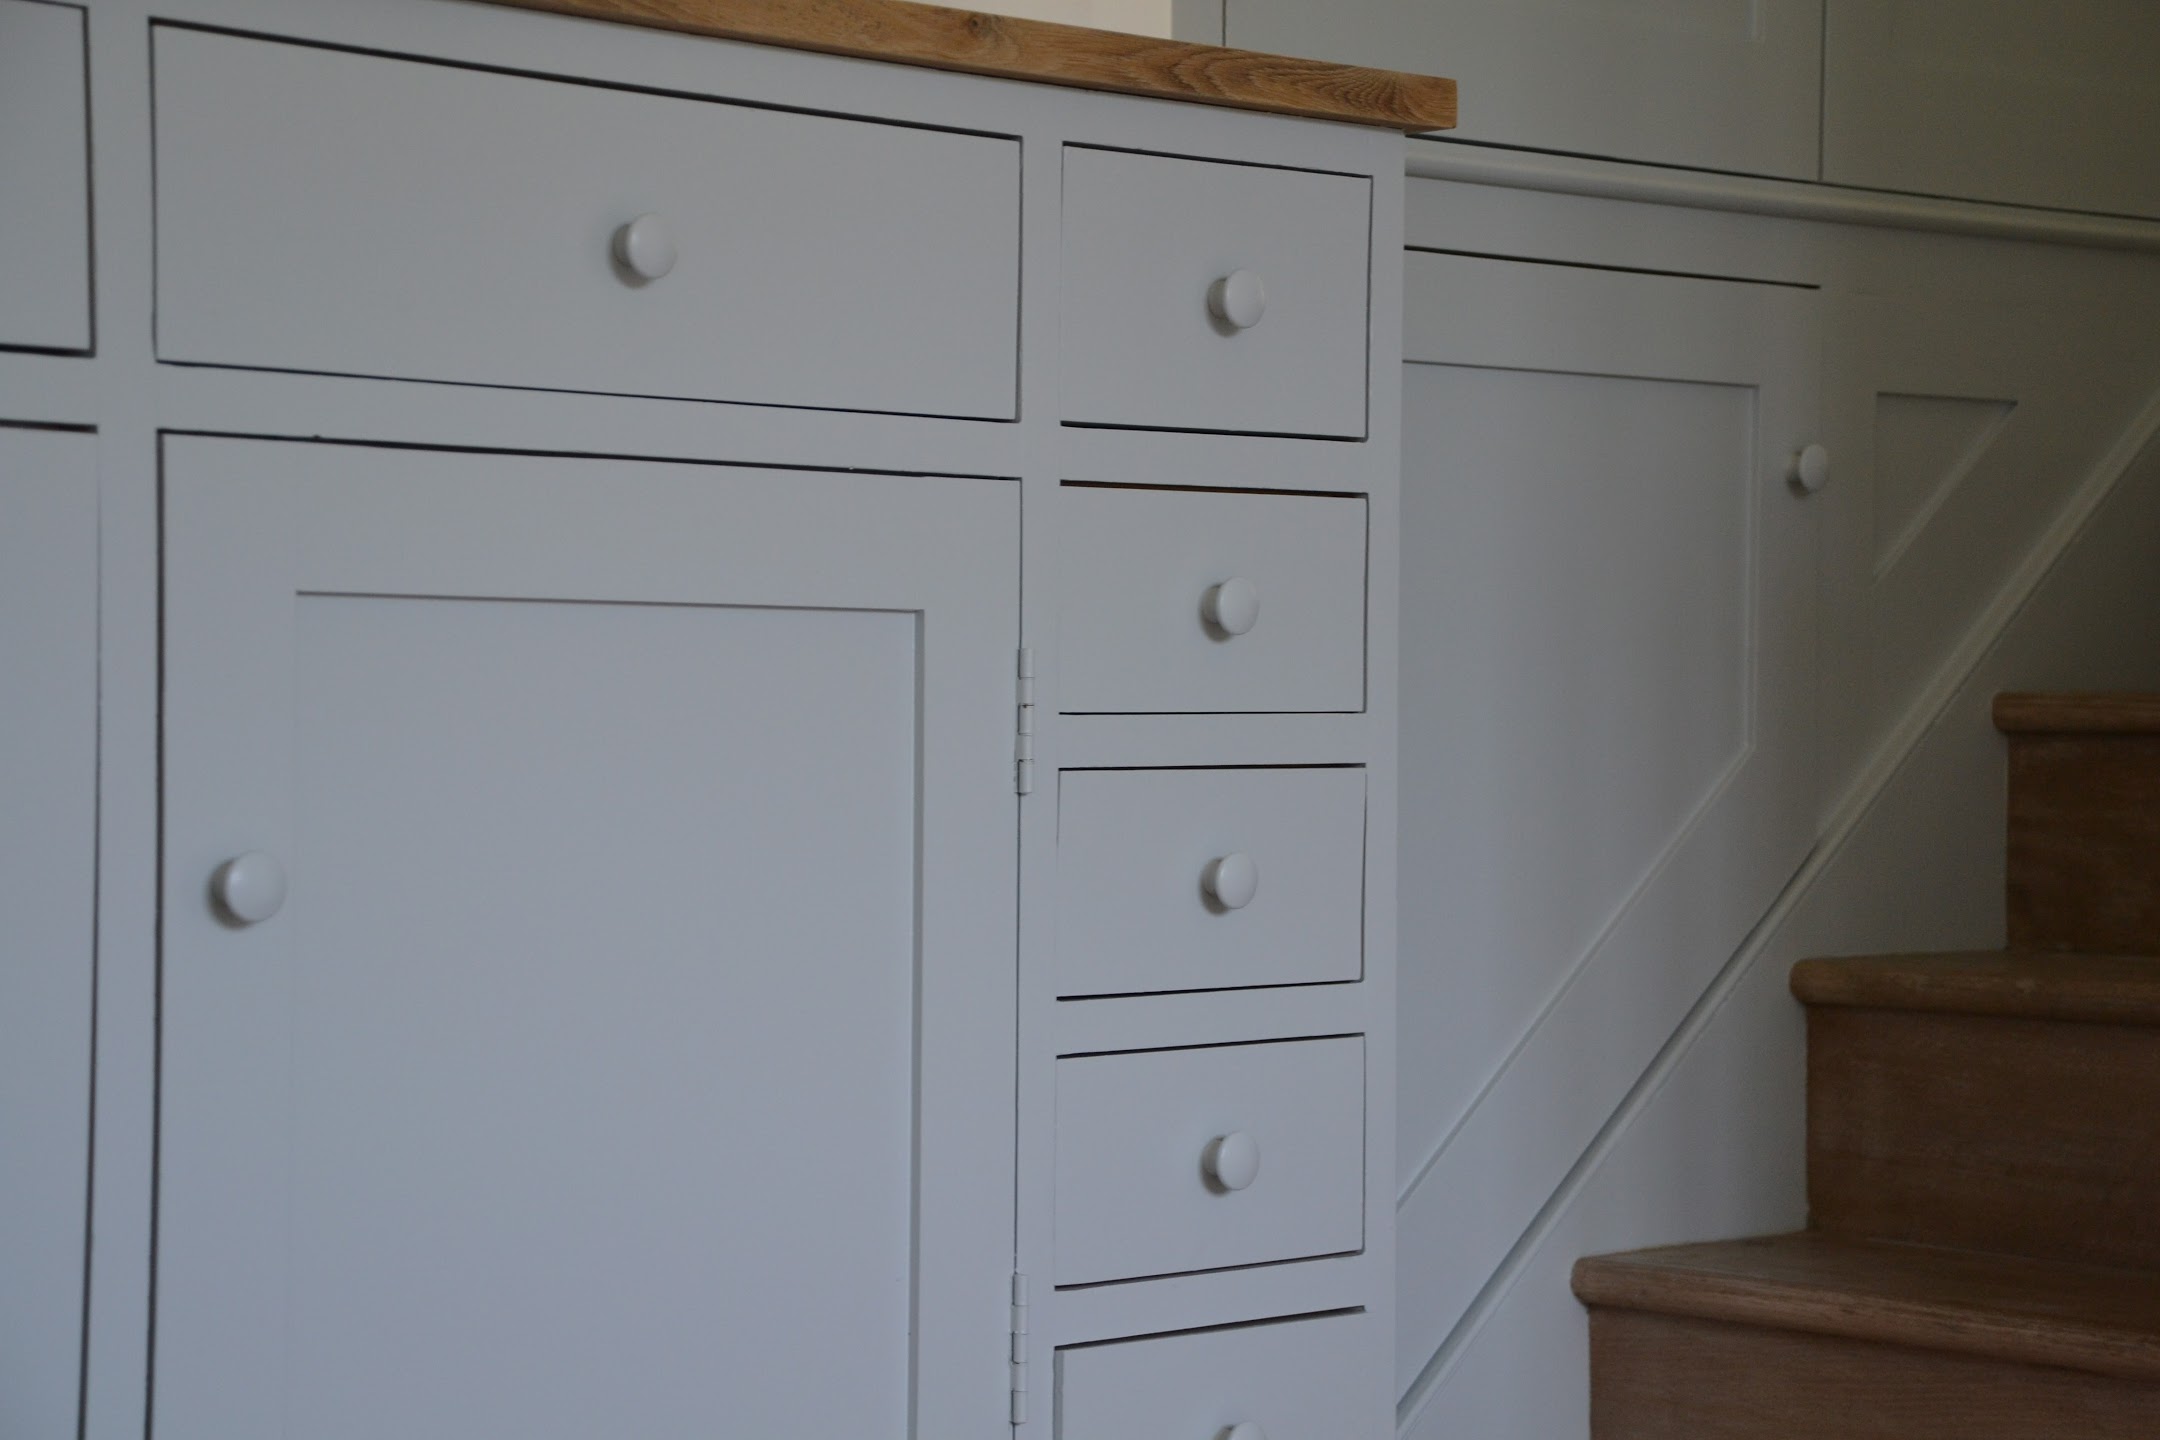 Furniture painters